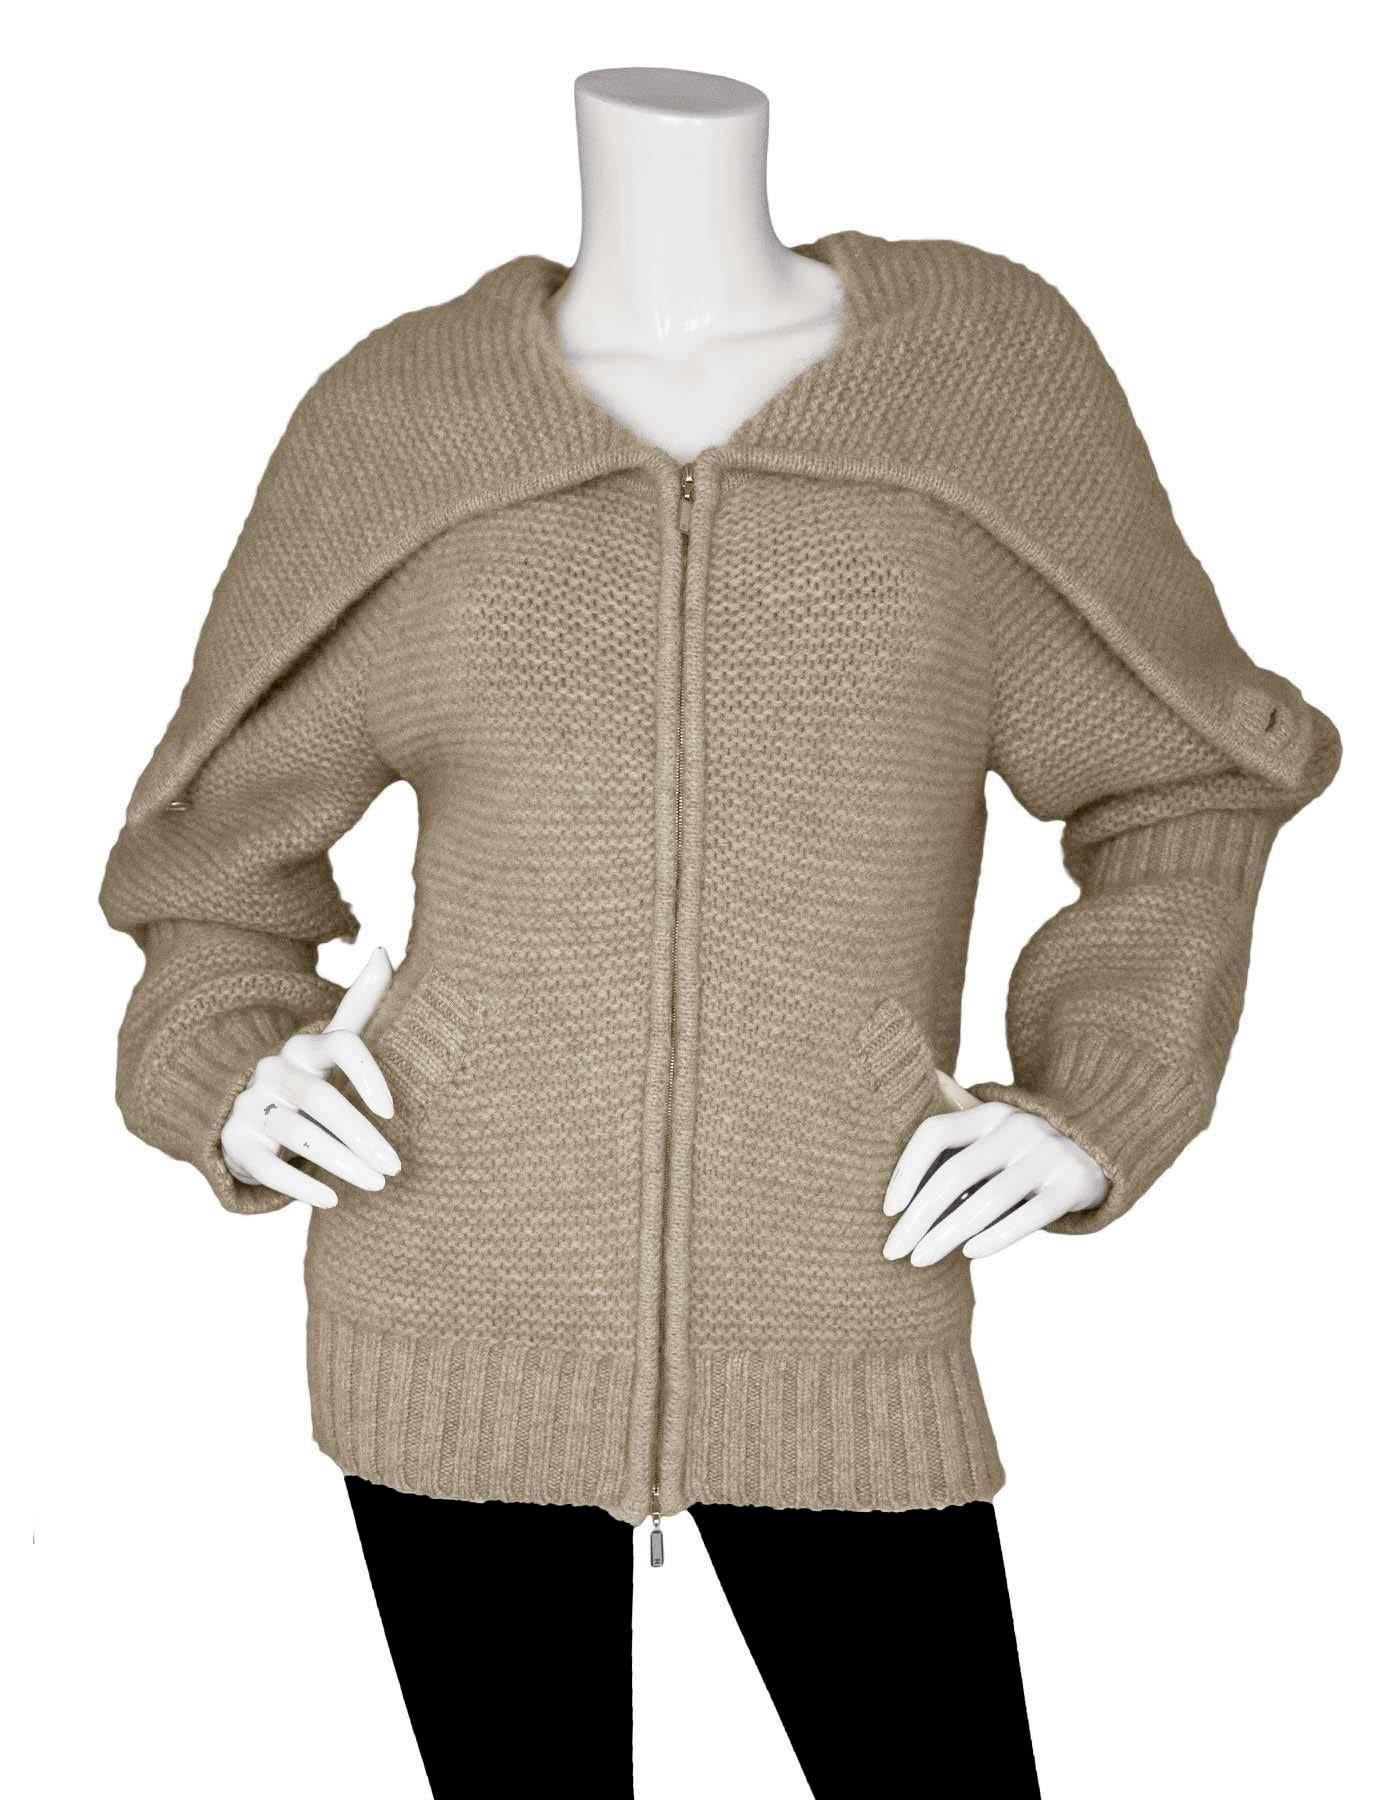 Chanel Oatmeal Cashmere Knit Sweater Sz FR38

Made In: France
Year Of Production: 2007
Color: Oatmeal
Materials: 84% cashmere, 15% mohair, 1% spandex
Lining: None
Closure/Opening: Front double zip closure
Exterior Pockets: Slit pockets at